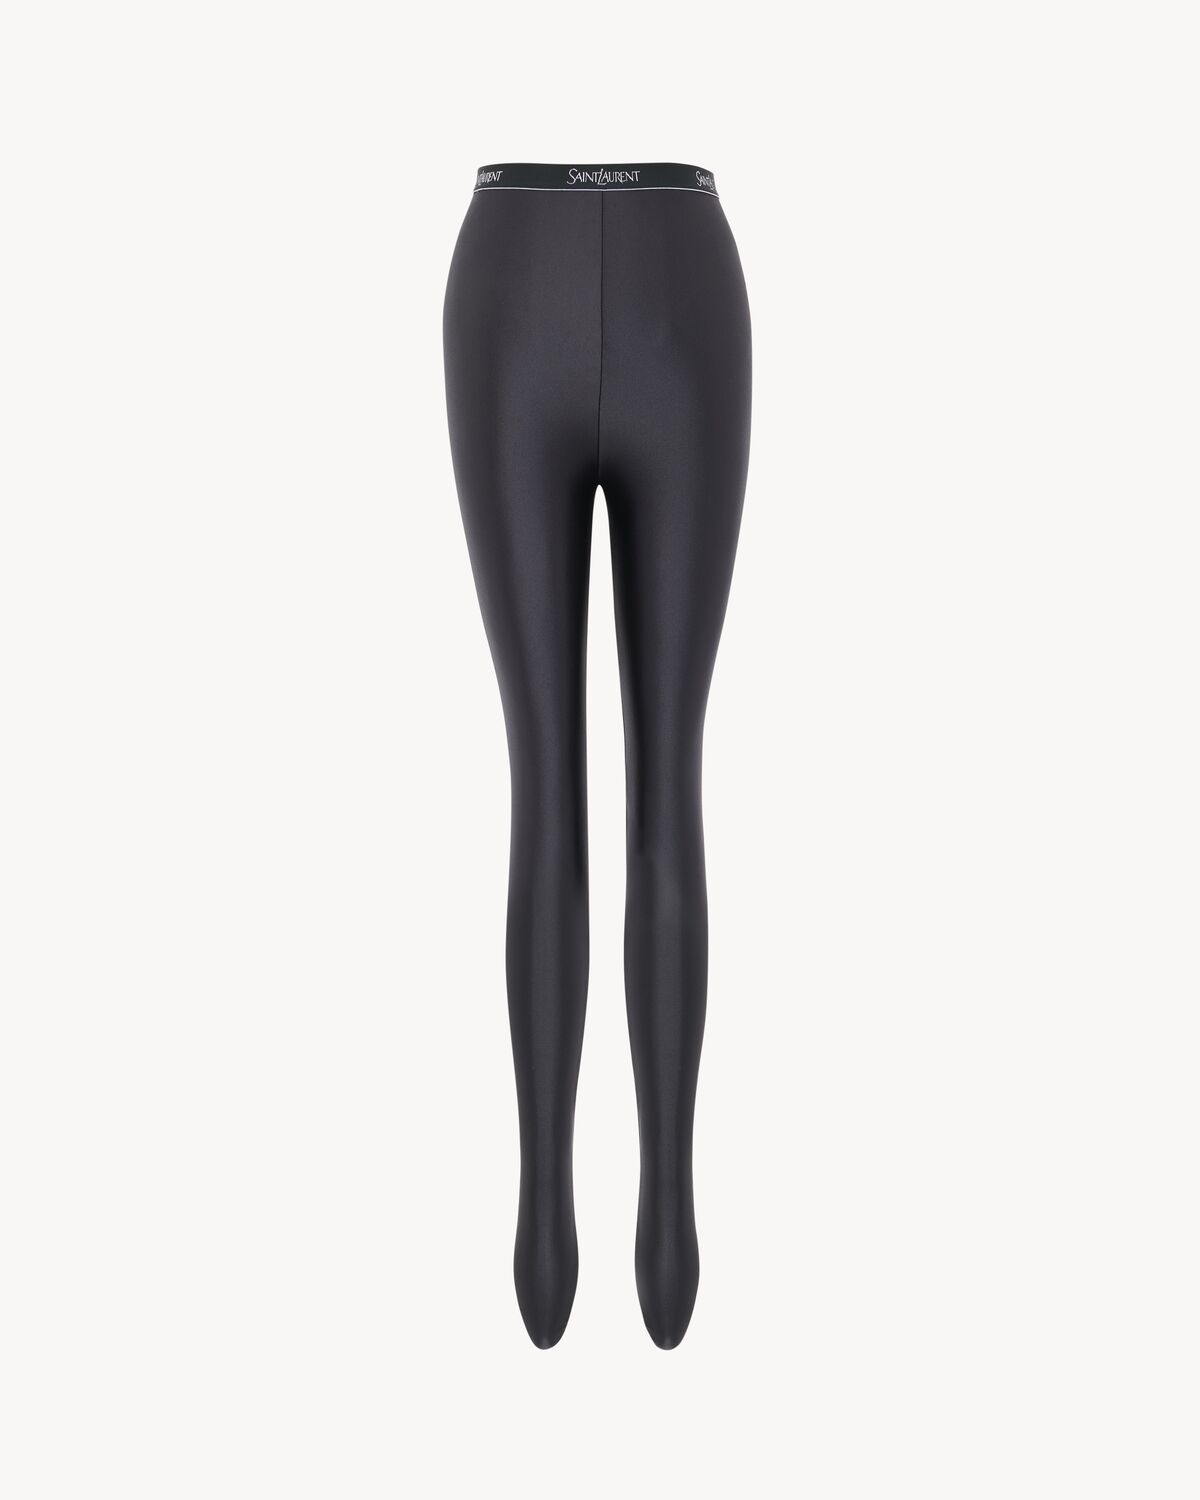 SAINT LAURENT tights in shiny jersey